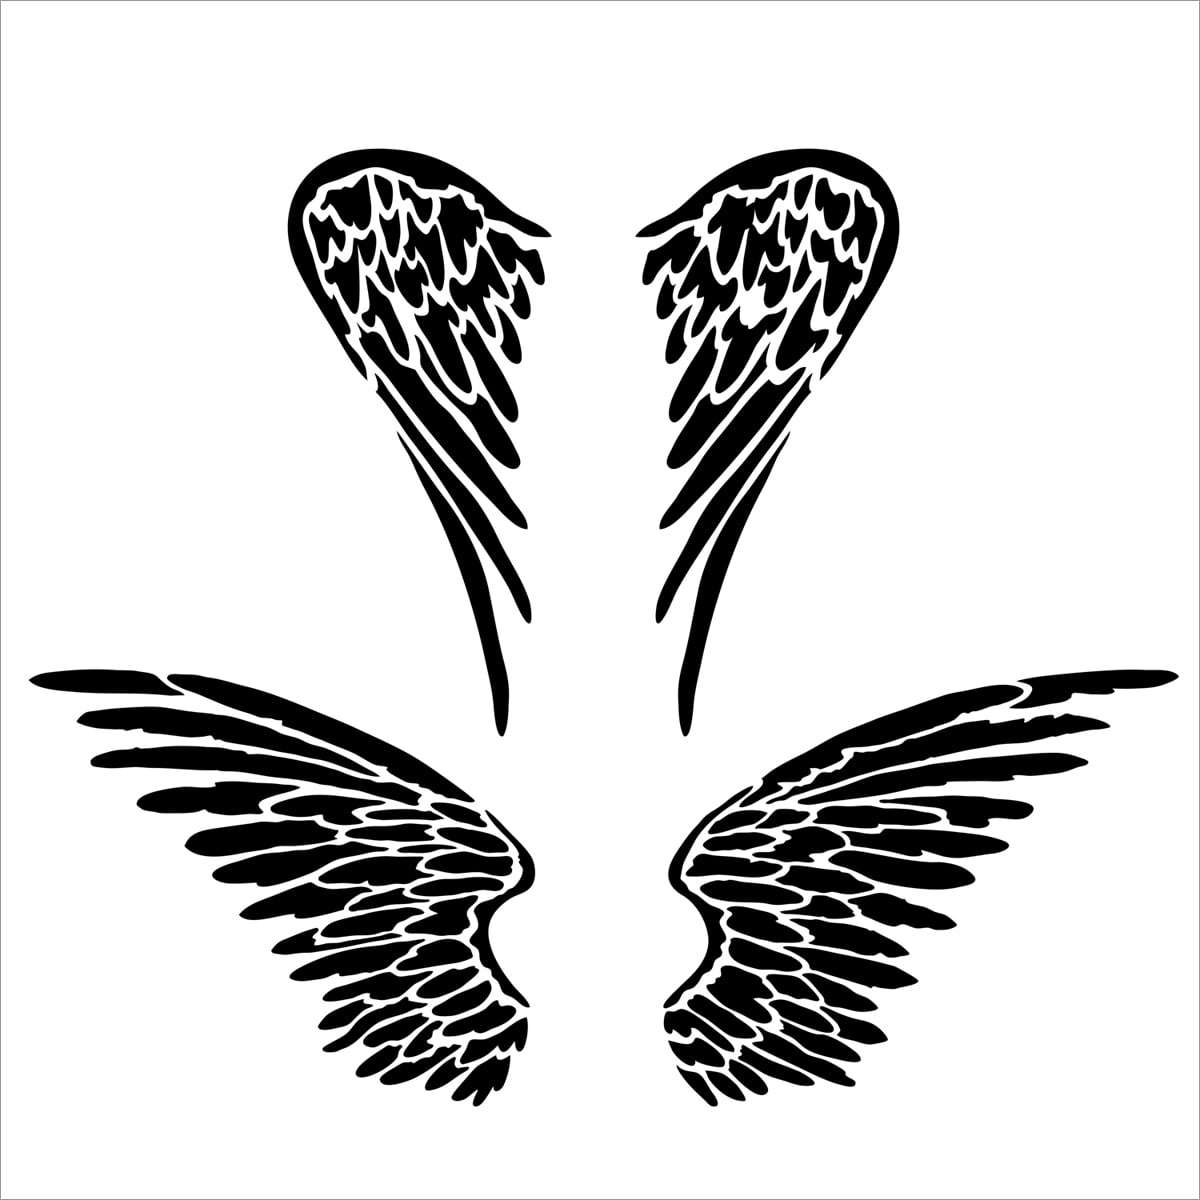  Angel Stencil - Stencil Angels, Angel, Angel Stencils, Angel  Stencil Art, Angel Wing Stencil : Arts, Crafts & Sewing